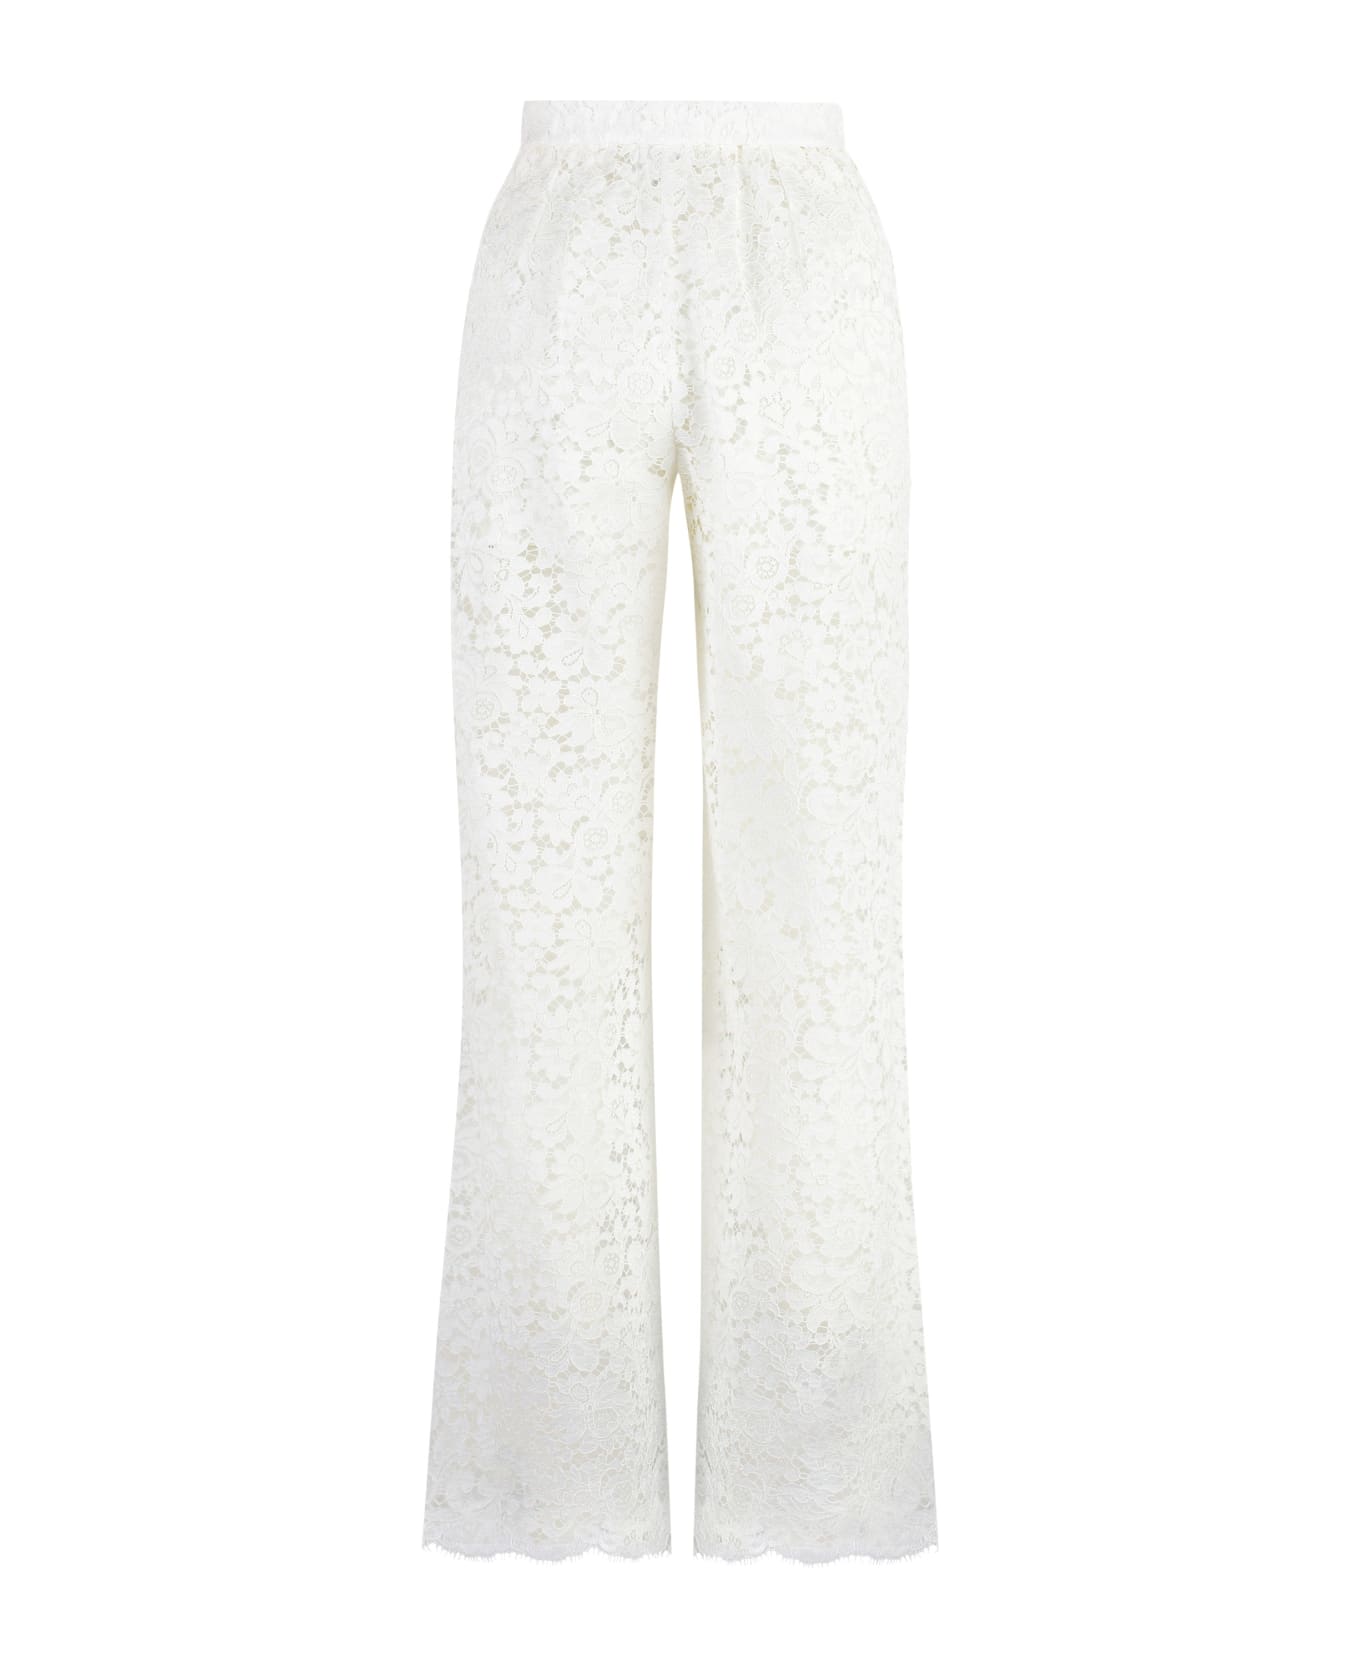 Dolce & Gabbana Lace Trousers - White ボトムス